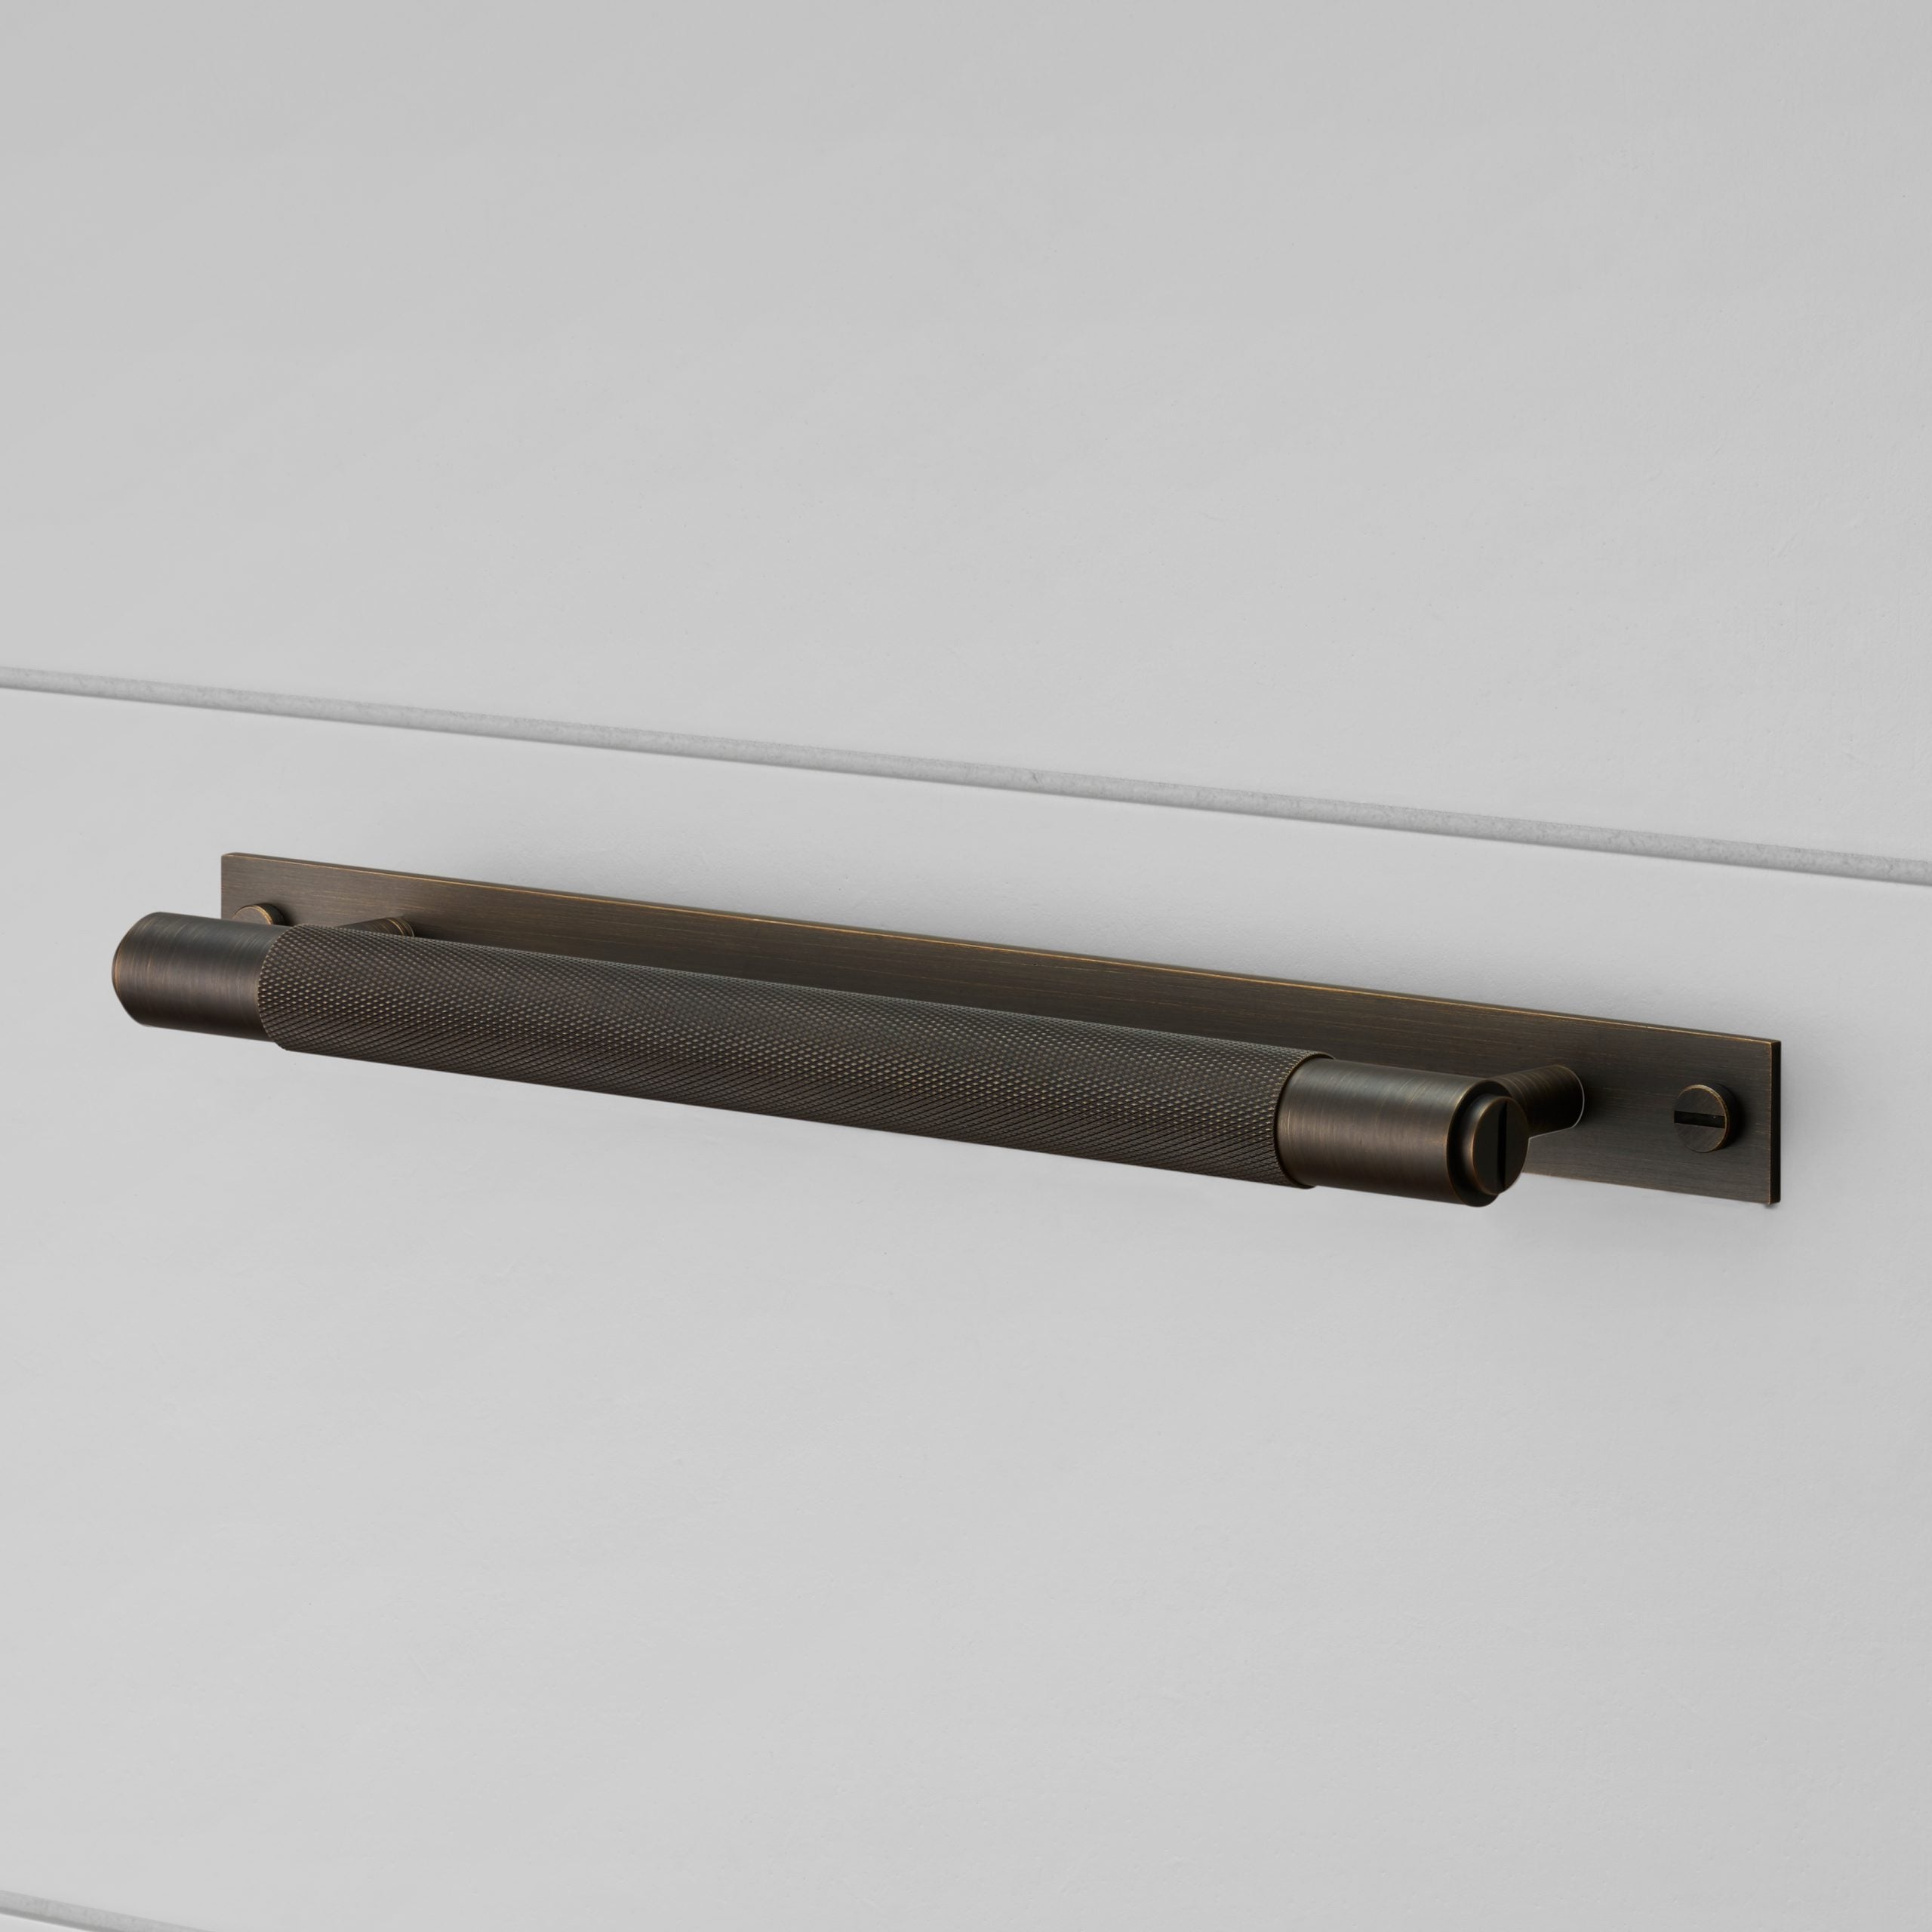 Buster + Punch Pull Bar, Cross Design Hardware Buster + Punch Smoked Bronze 0.32x0.07x0.03 